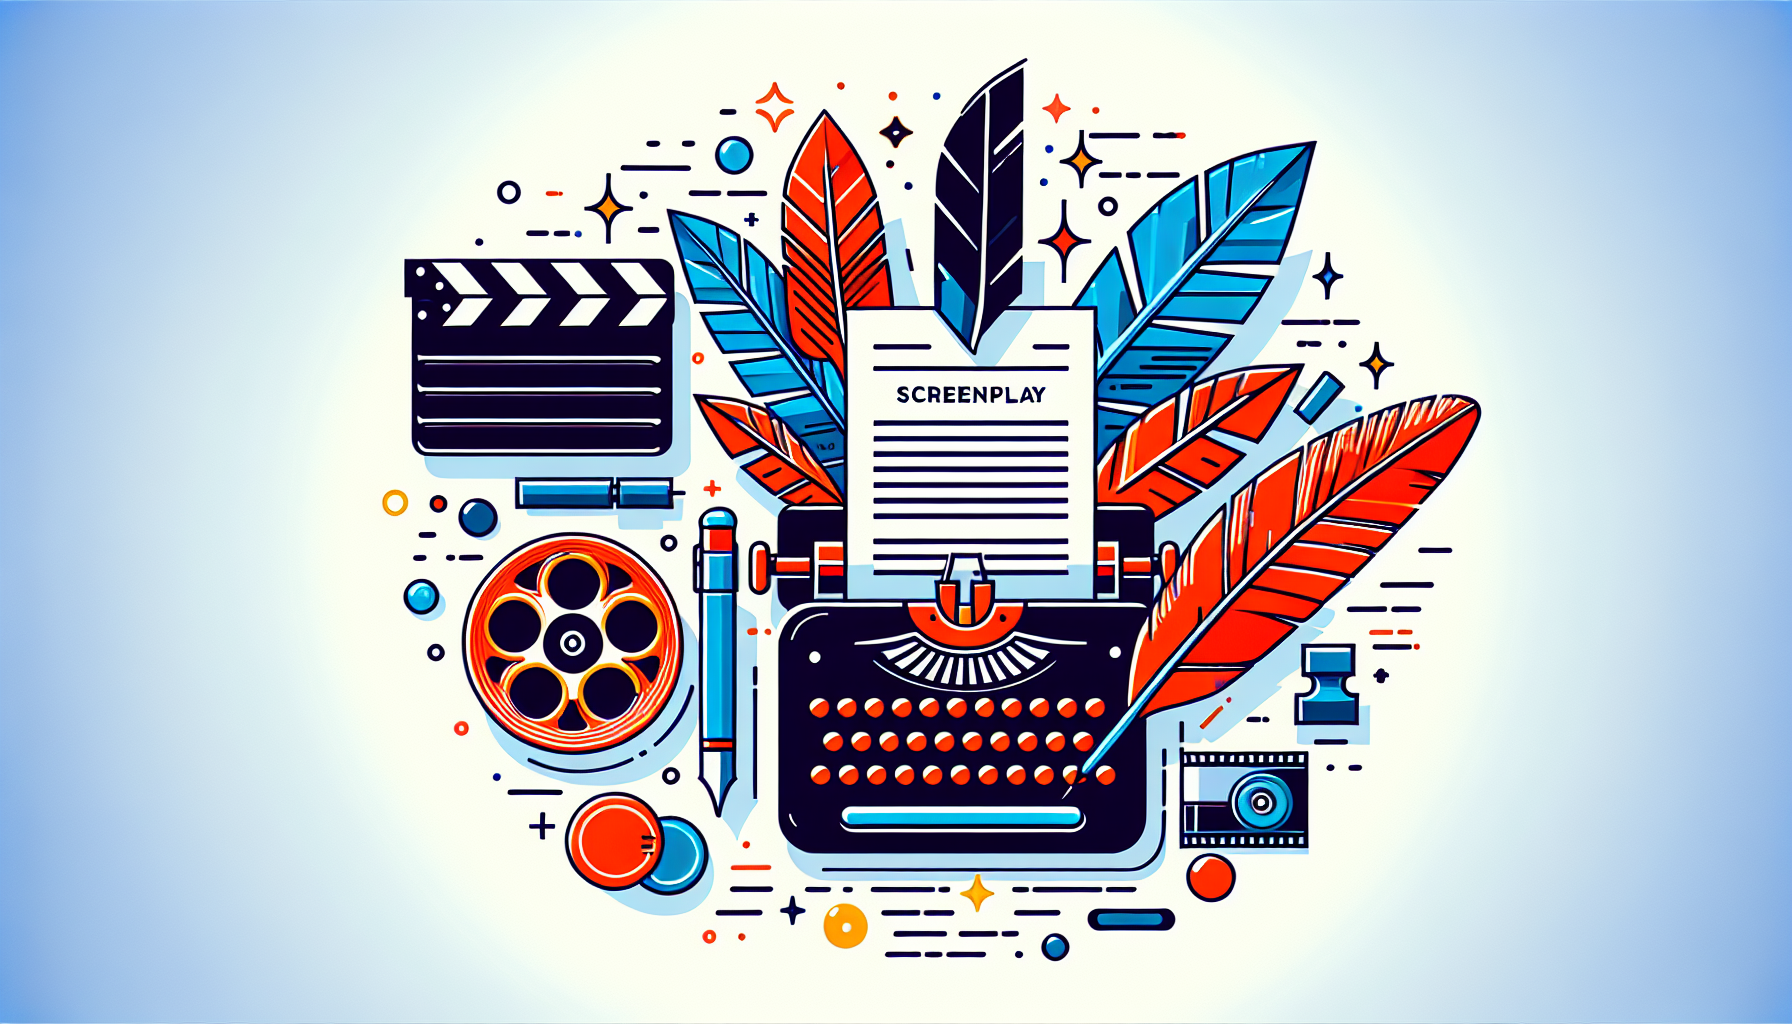 An image representing a guide to writing your first screenplay, illustrated without any text. The image should be vibrant and modern. It could include elements like a draft screenplay, a feather quill, a typewriter and a film reel, all arranged in a creative and engaging manner.